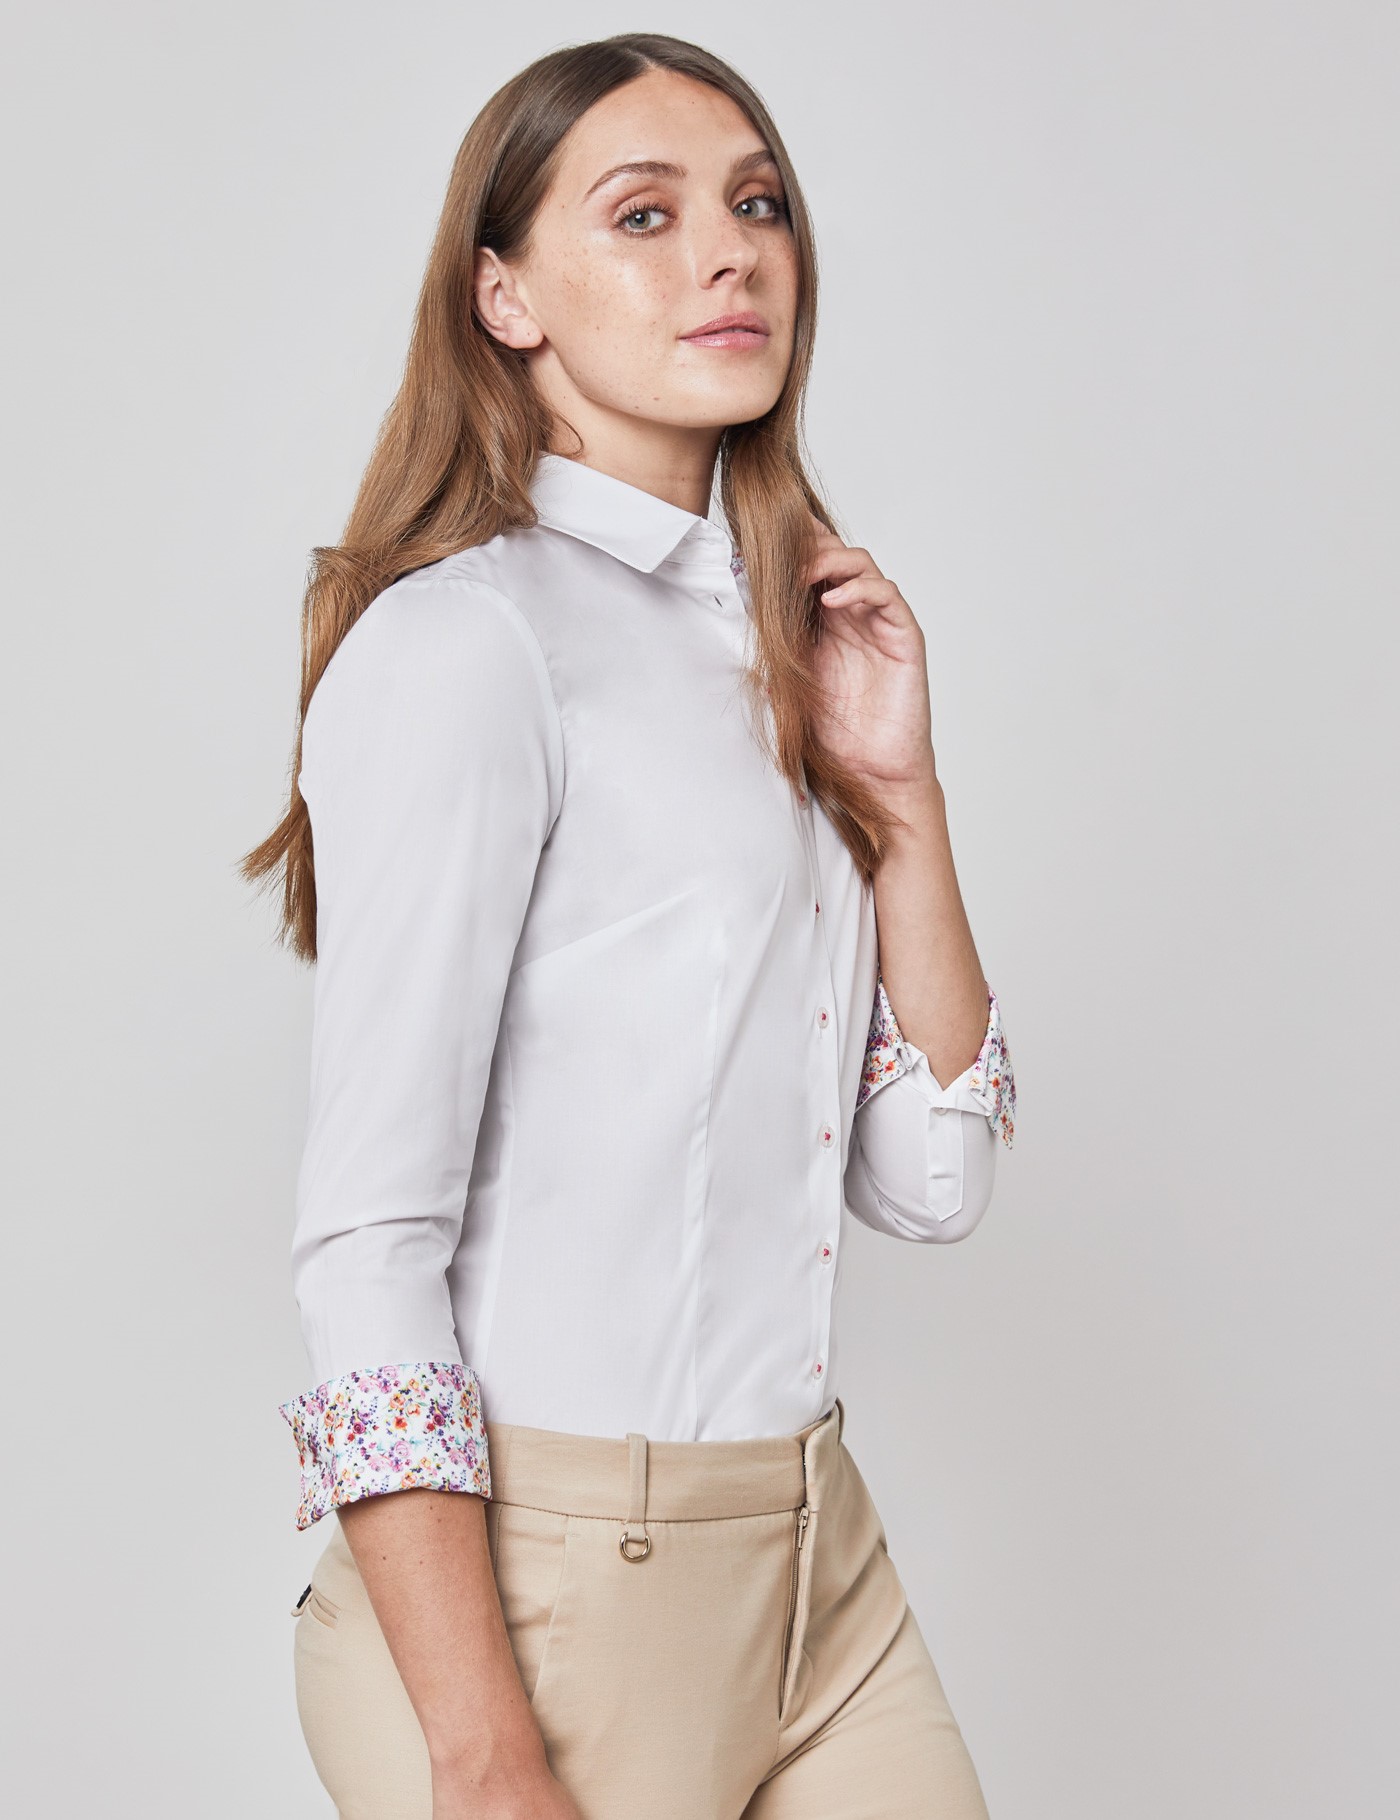 Easy Iron Plain Cotton Stretch Women's Fitted Shirt with Contrast ...